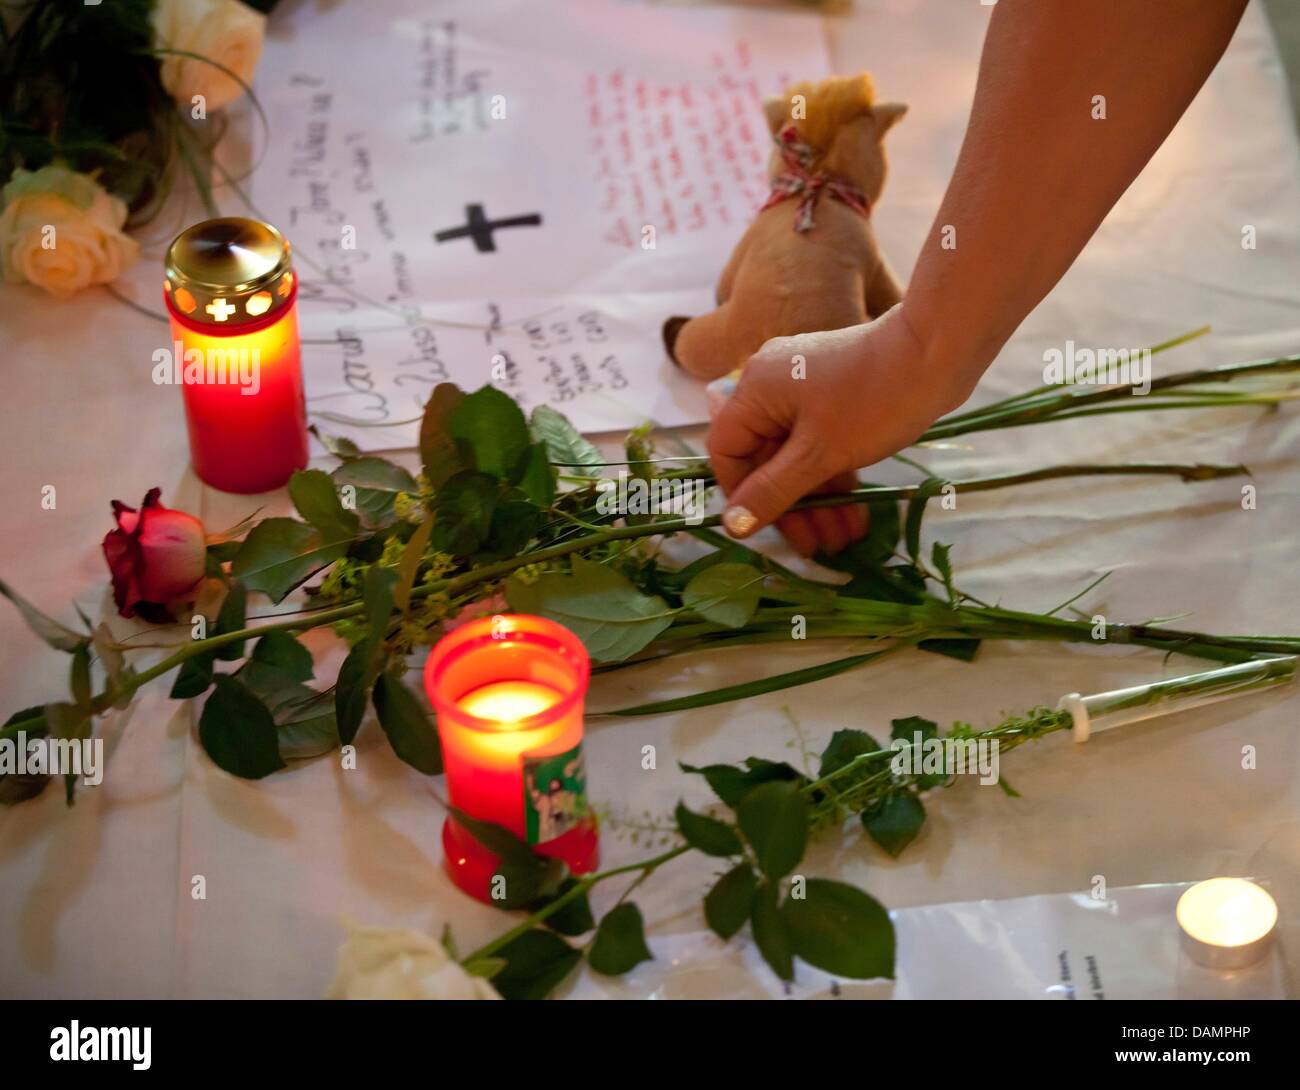 A child lays a flower at the alter of the Magdalene Church at the beginning of a memorial service for killed, seven year old Mary-Jane in Zella-Mehlis, Germany, 27 June 2011. Only one day after her disappearance, the body of Mary-Jane was discovered in a stream barely 1.5 kilometers from her mother's home. Photo: Michael Reichel Stock Photo